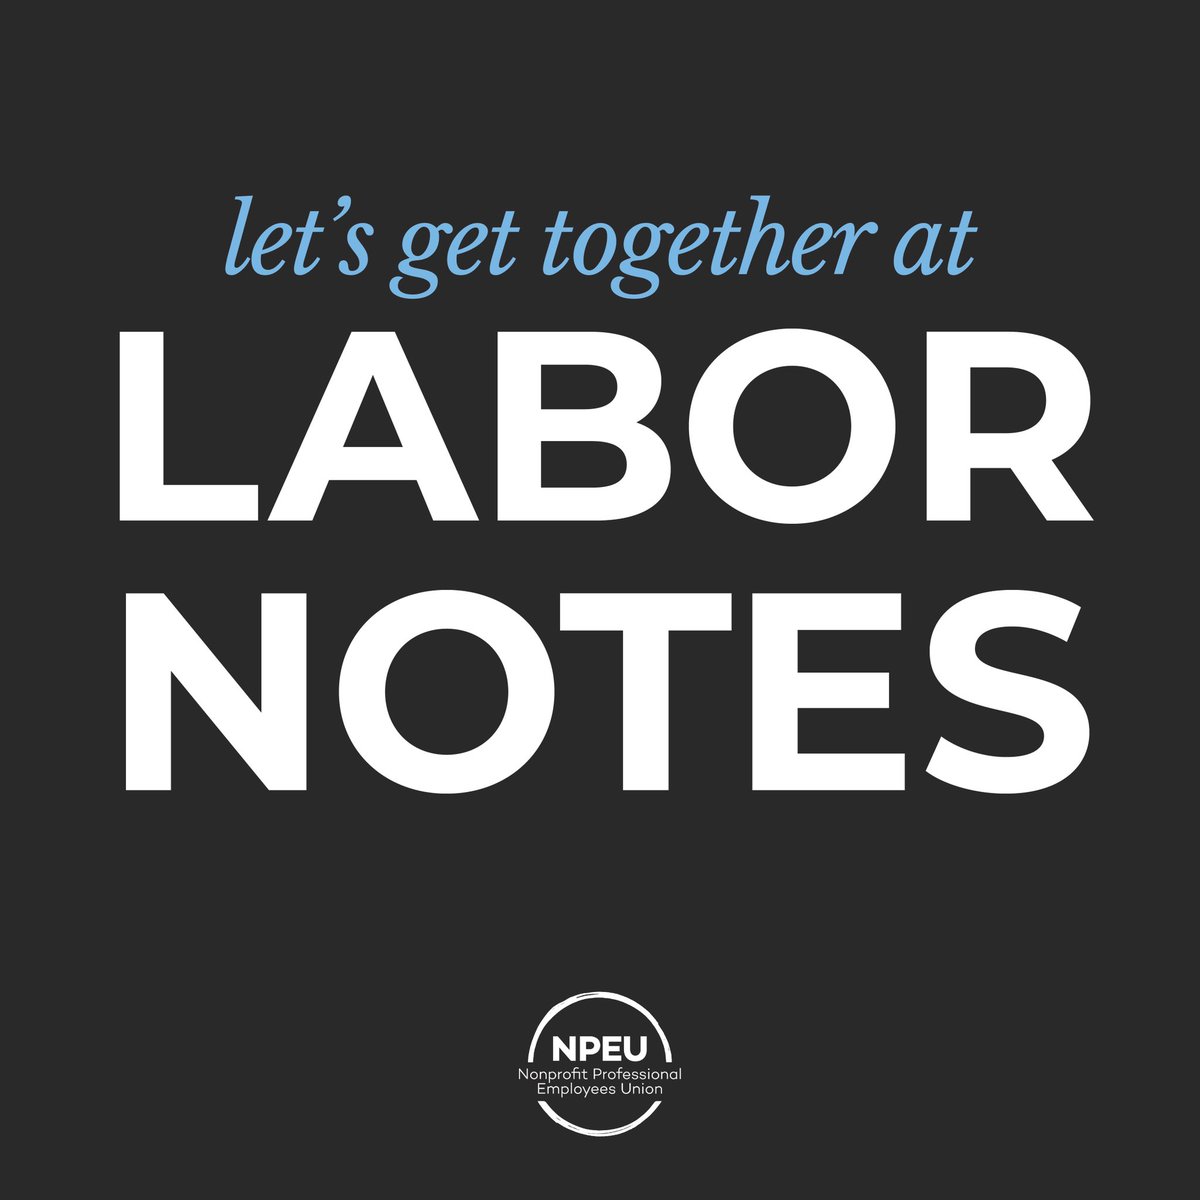 We look forward to seeing unionists from across the globe at @labornotes this week! If you are a member of NPEU, sign up here to receive info on our Labor Notes meet-up: actionnetwork.org/forms/meet-npe…